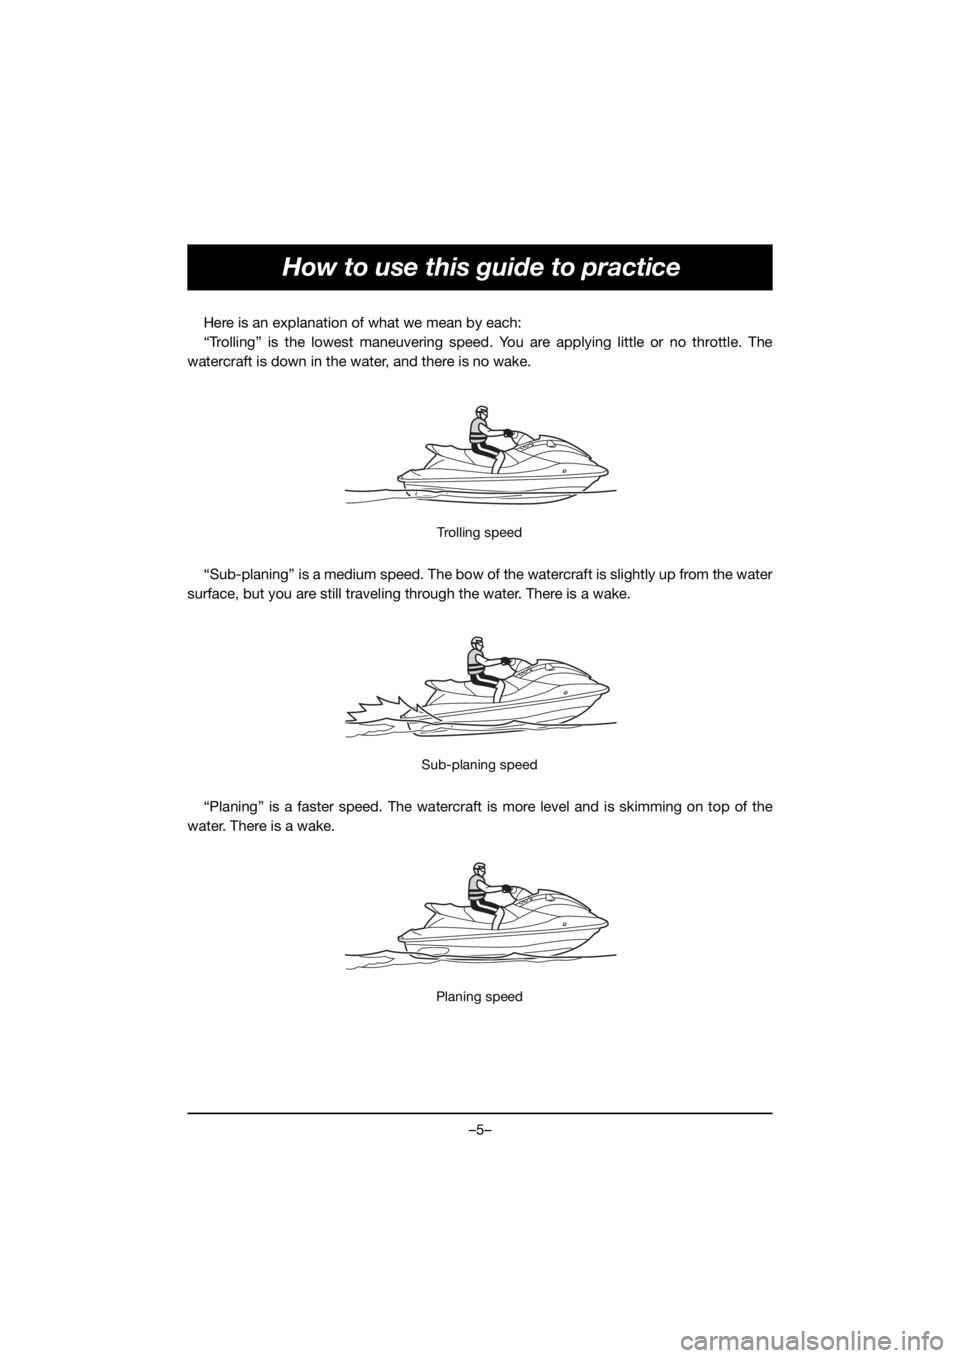 YAMAHA VX-C 2021  Owners Manual –5–
How to use this guide to practice
Here is an explanation of what we mean by each:
“Trolling” is the lowest maneuvering speed. You are applying little or no throttle. The
watercraft is down